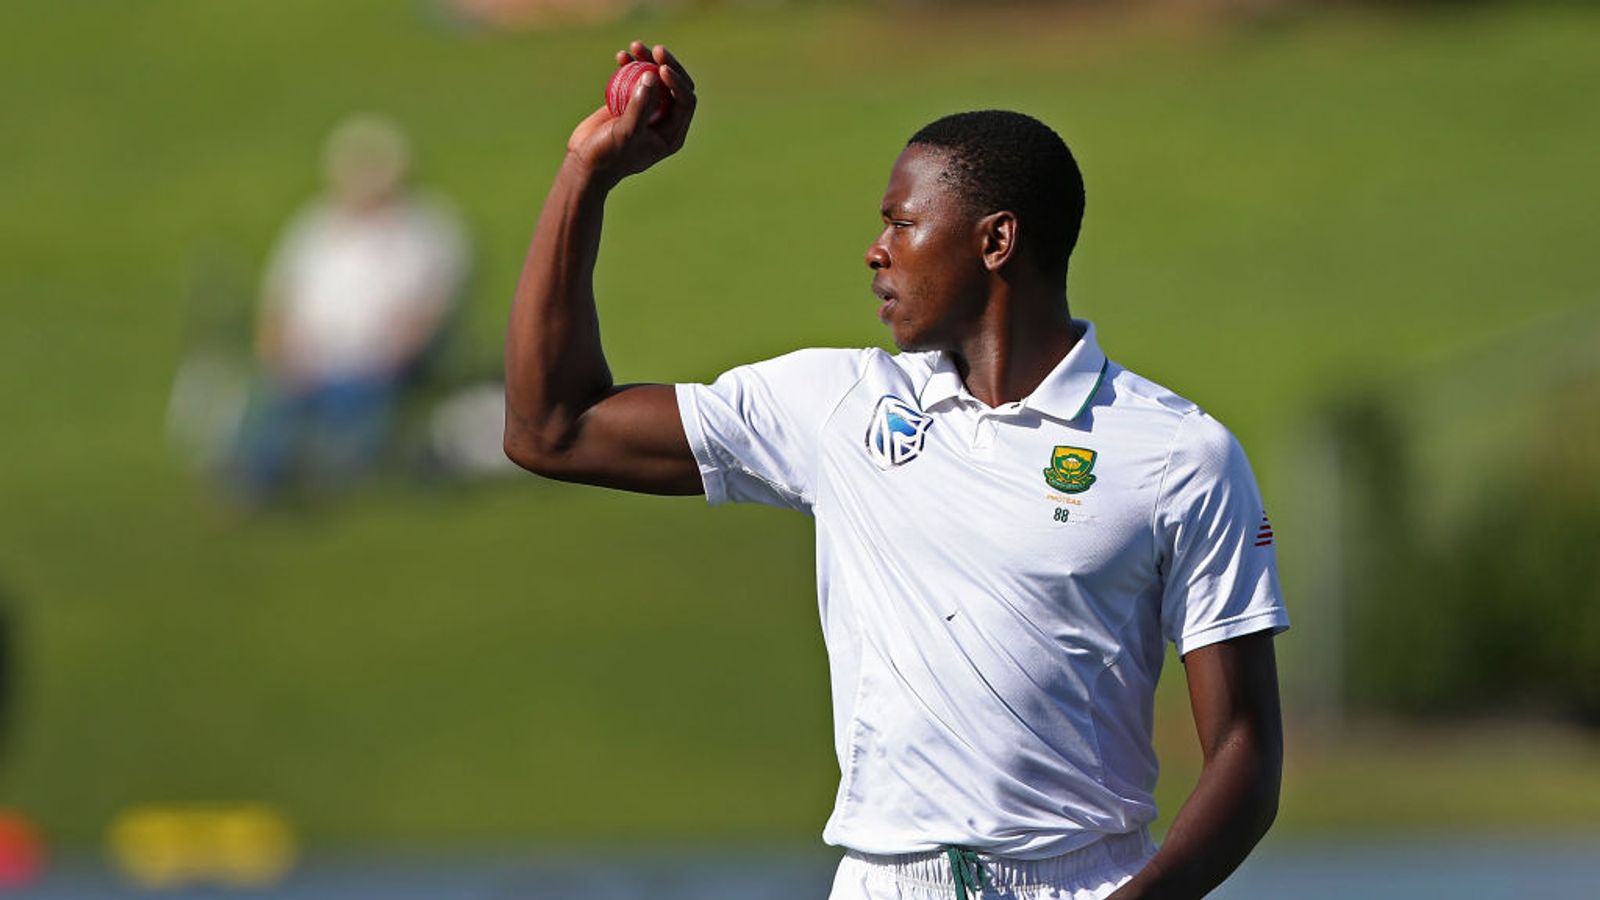 ICC Test Rankings: Kagiso Rabada jumps to 3rd after Lord's heroics, Pat Cummins remains top - Check out, ICC Test Bowler rankings, ICC ODI Rankings